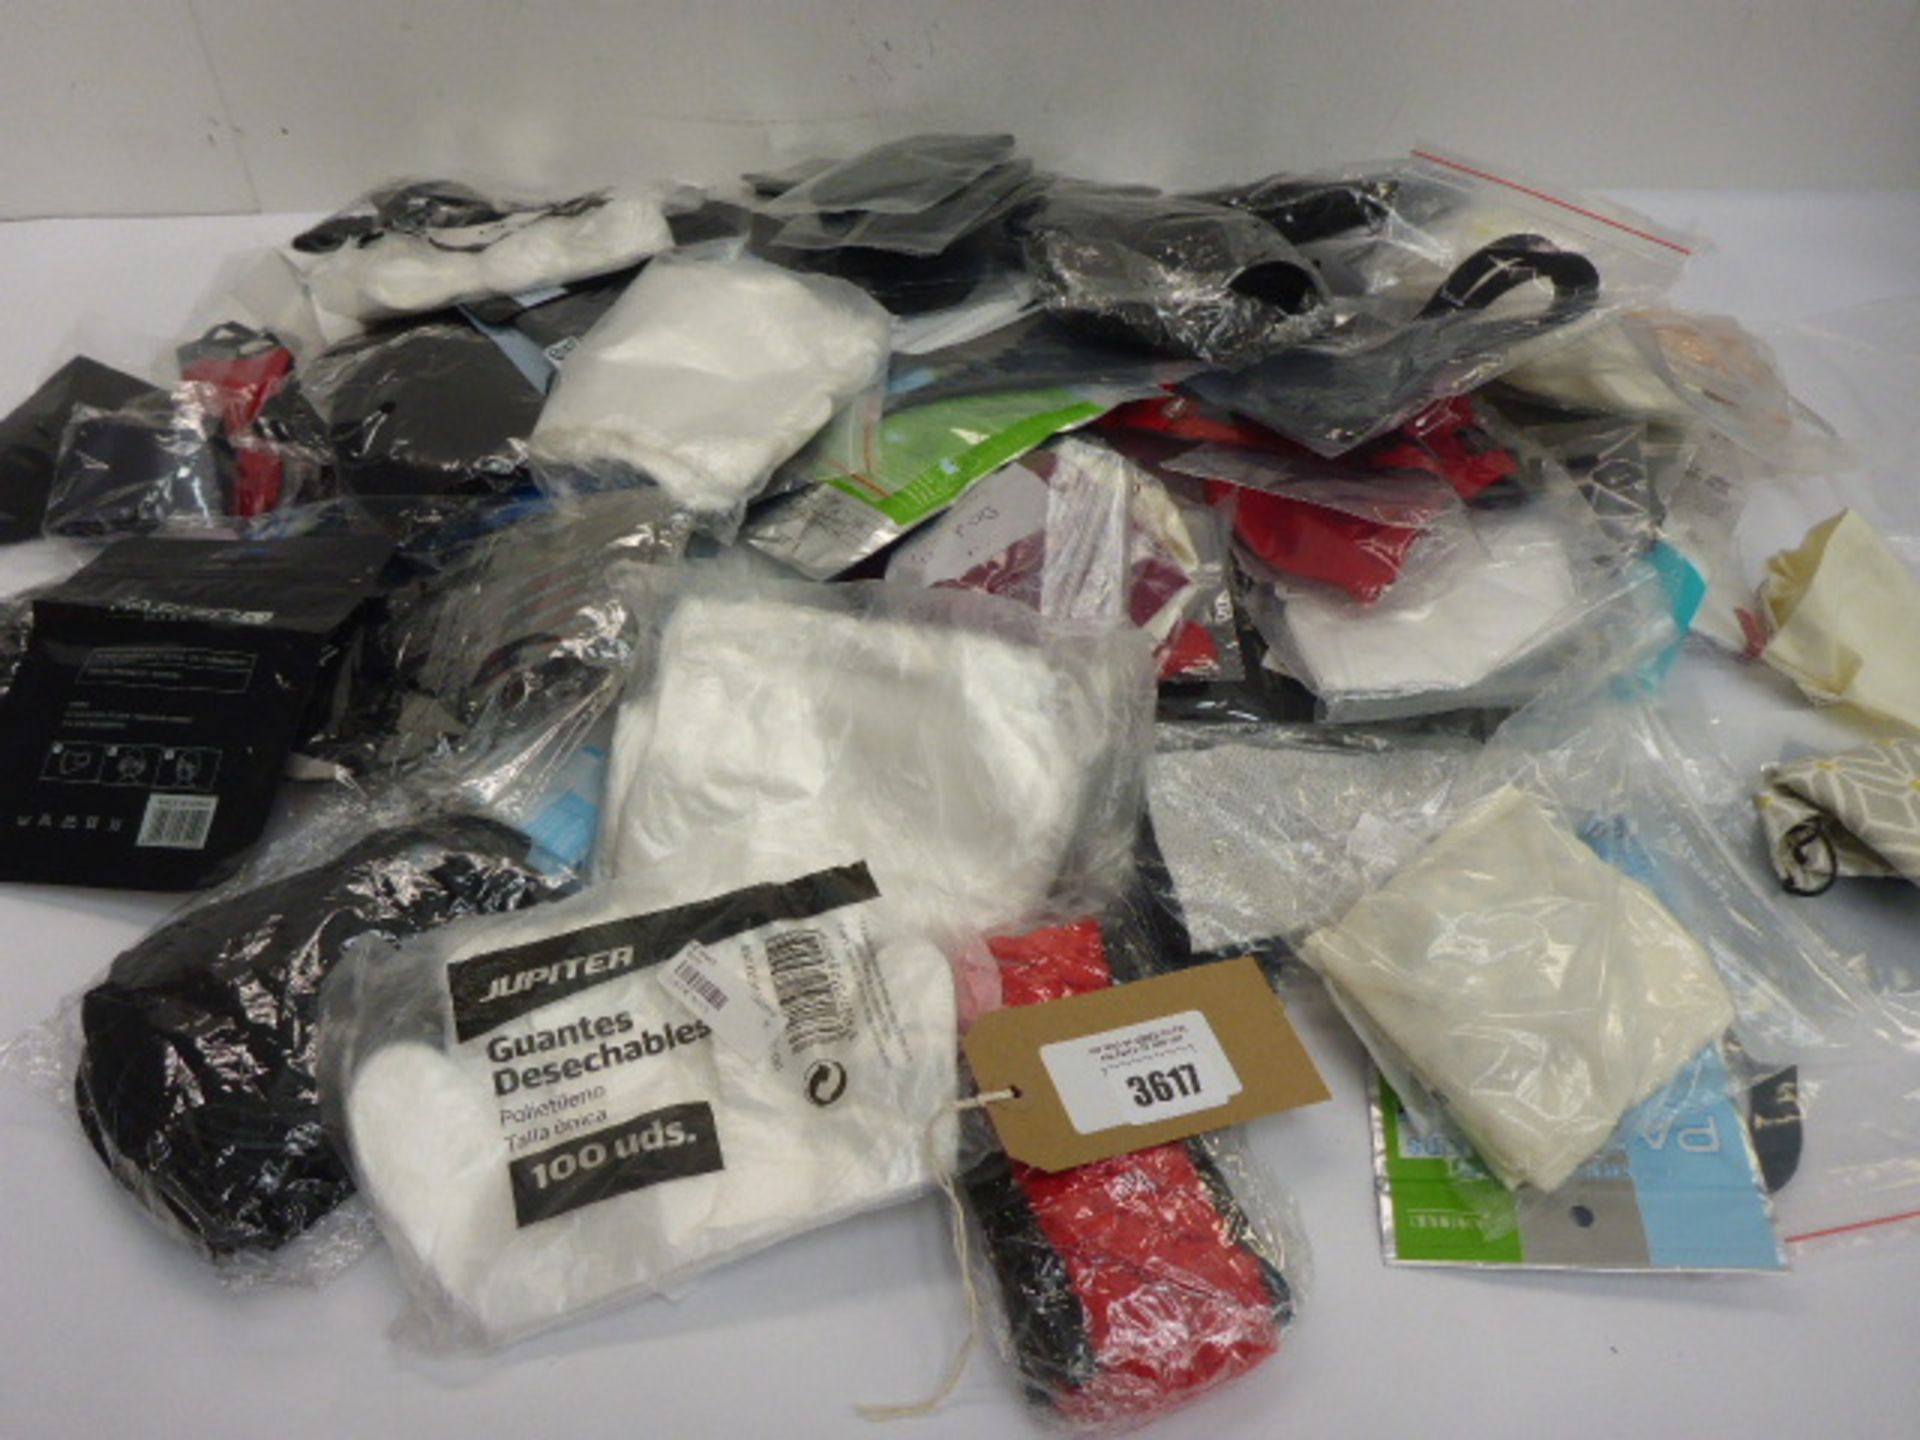 Quantity of personal protection face masks and gloves